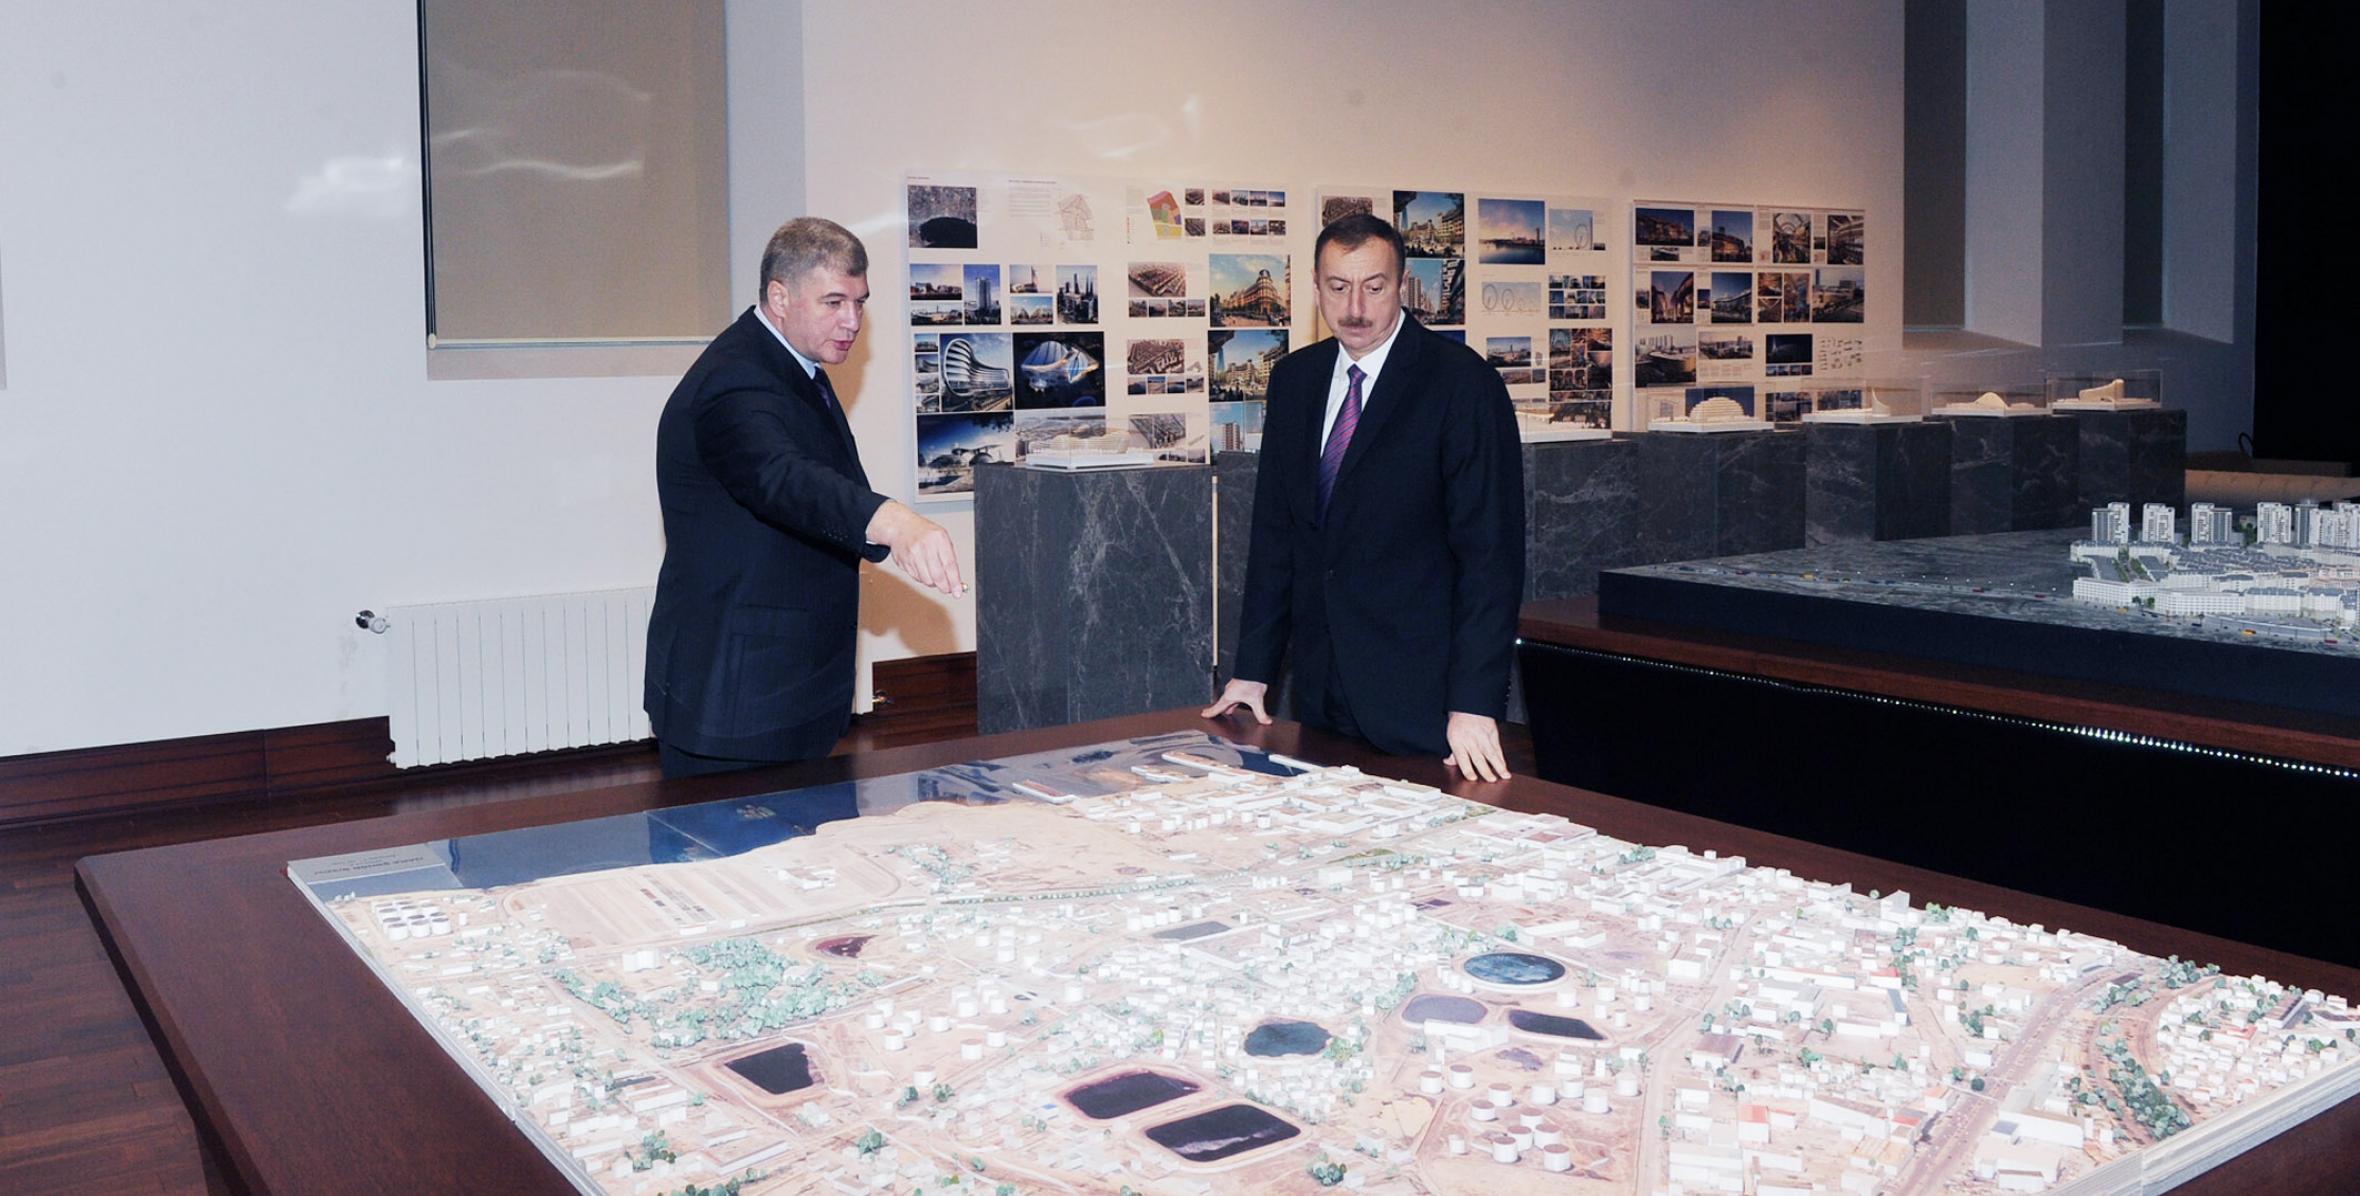 Ilham Aliyev attended the groundbreaking ceremony of the Baku White City project